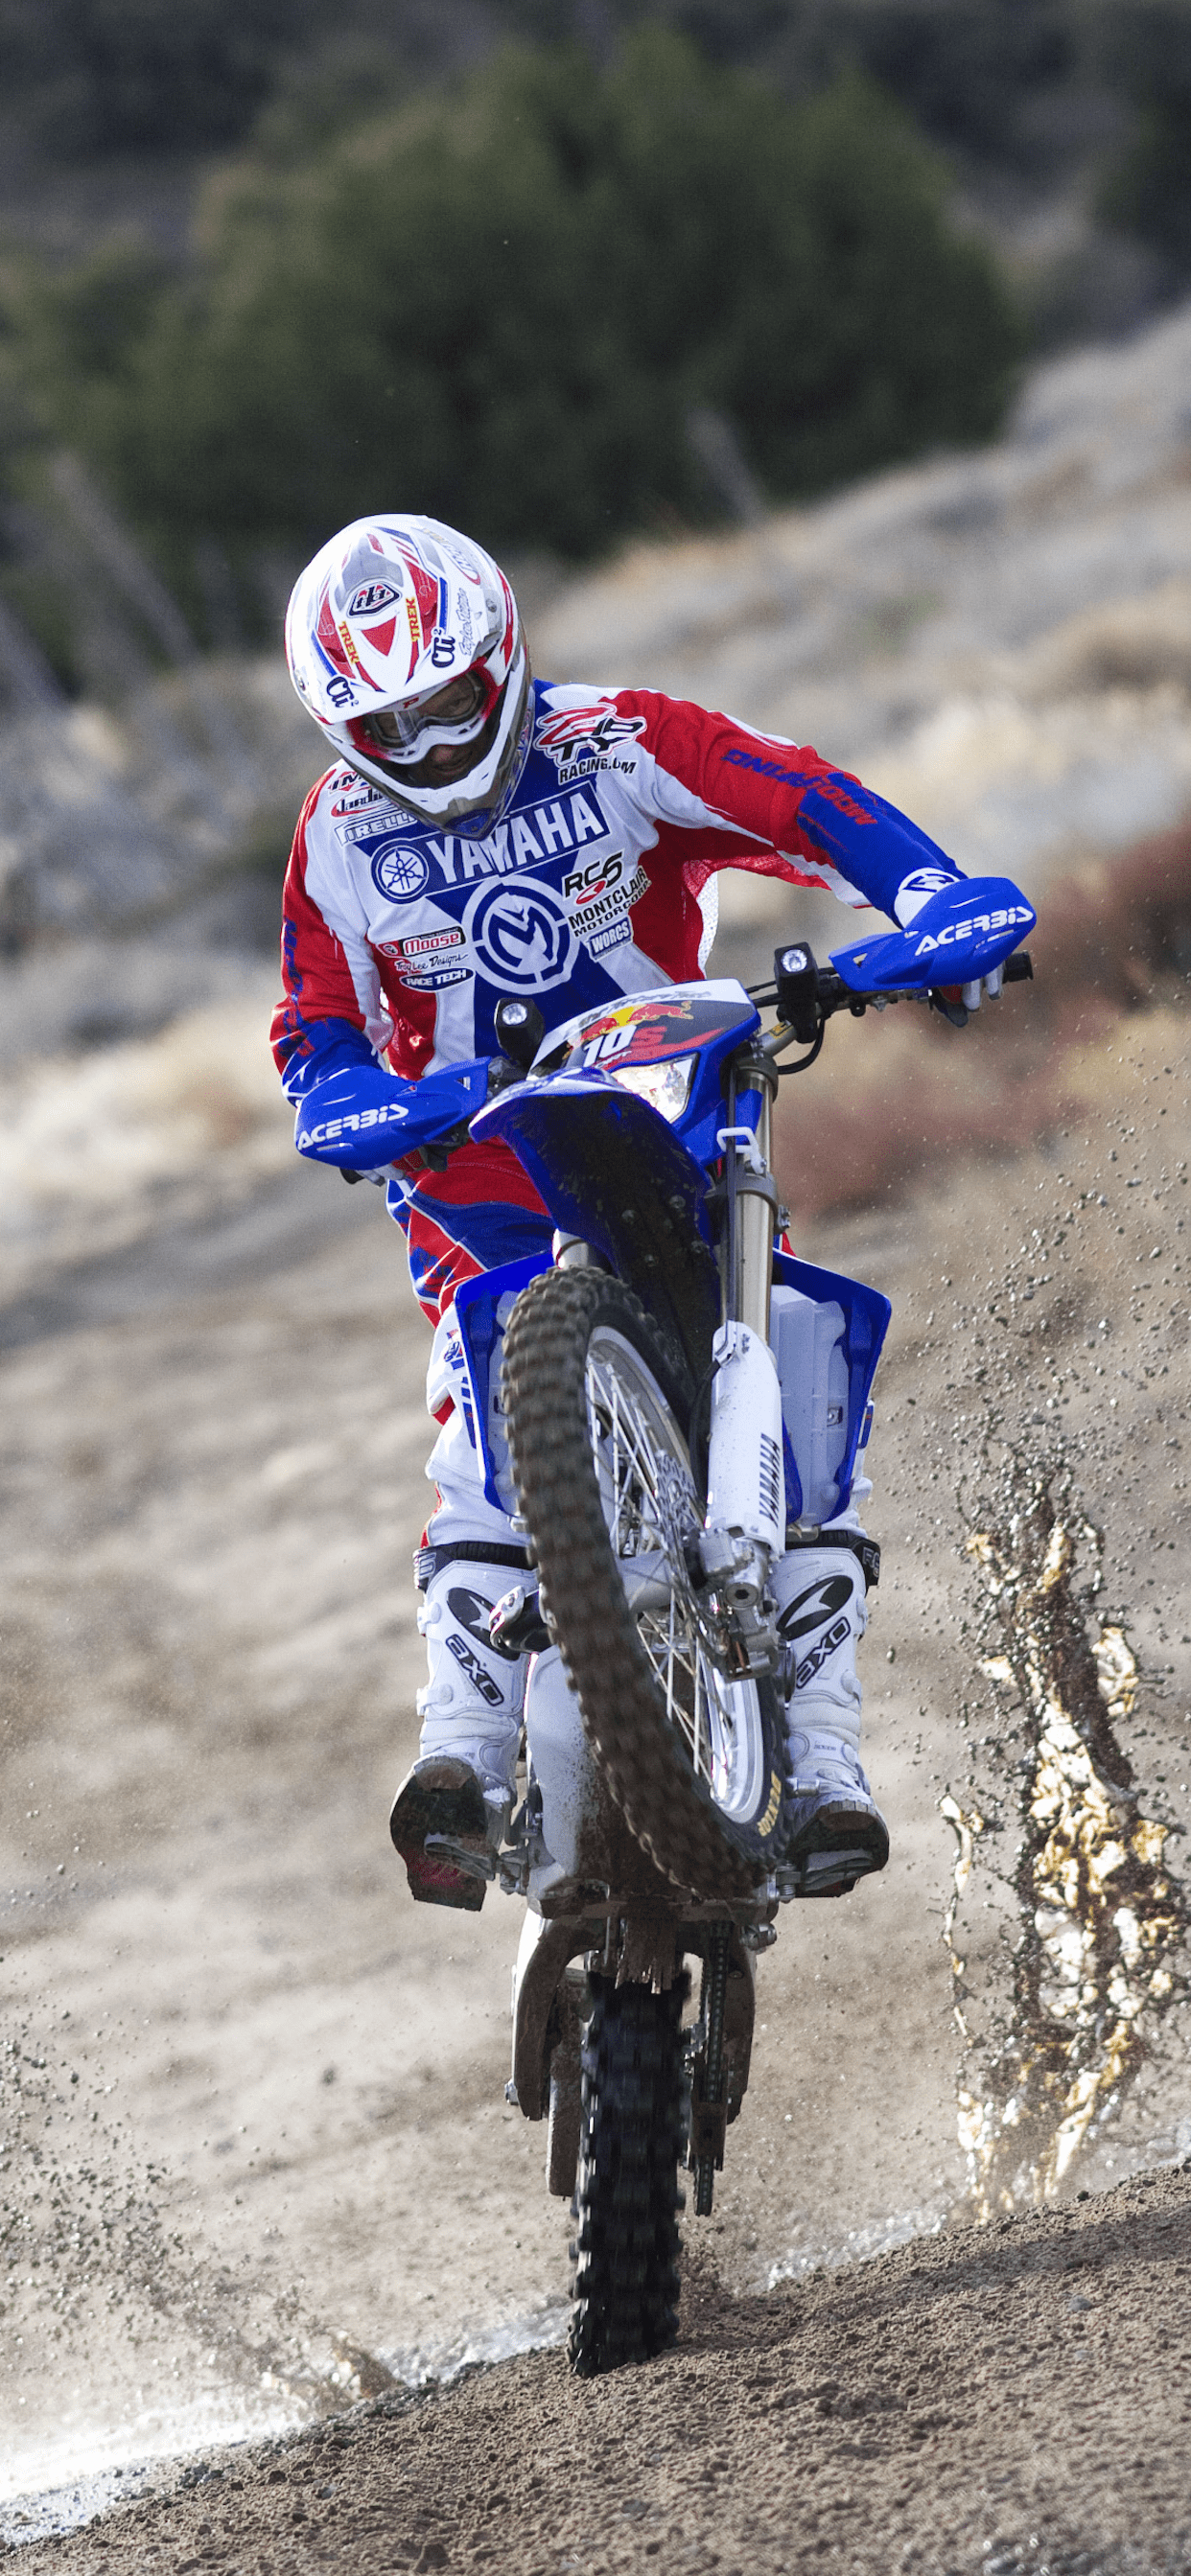 Motocross Wallpaper For iPhone Pro Max X